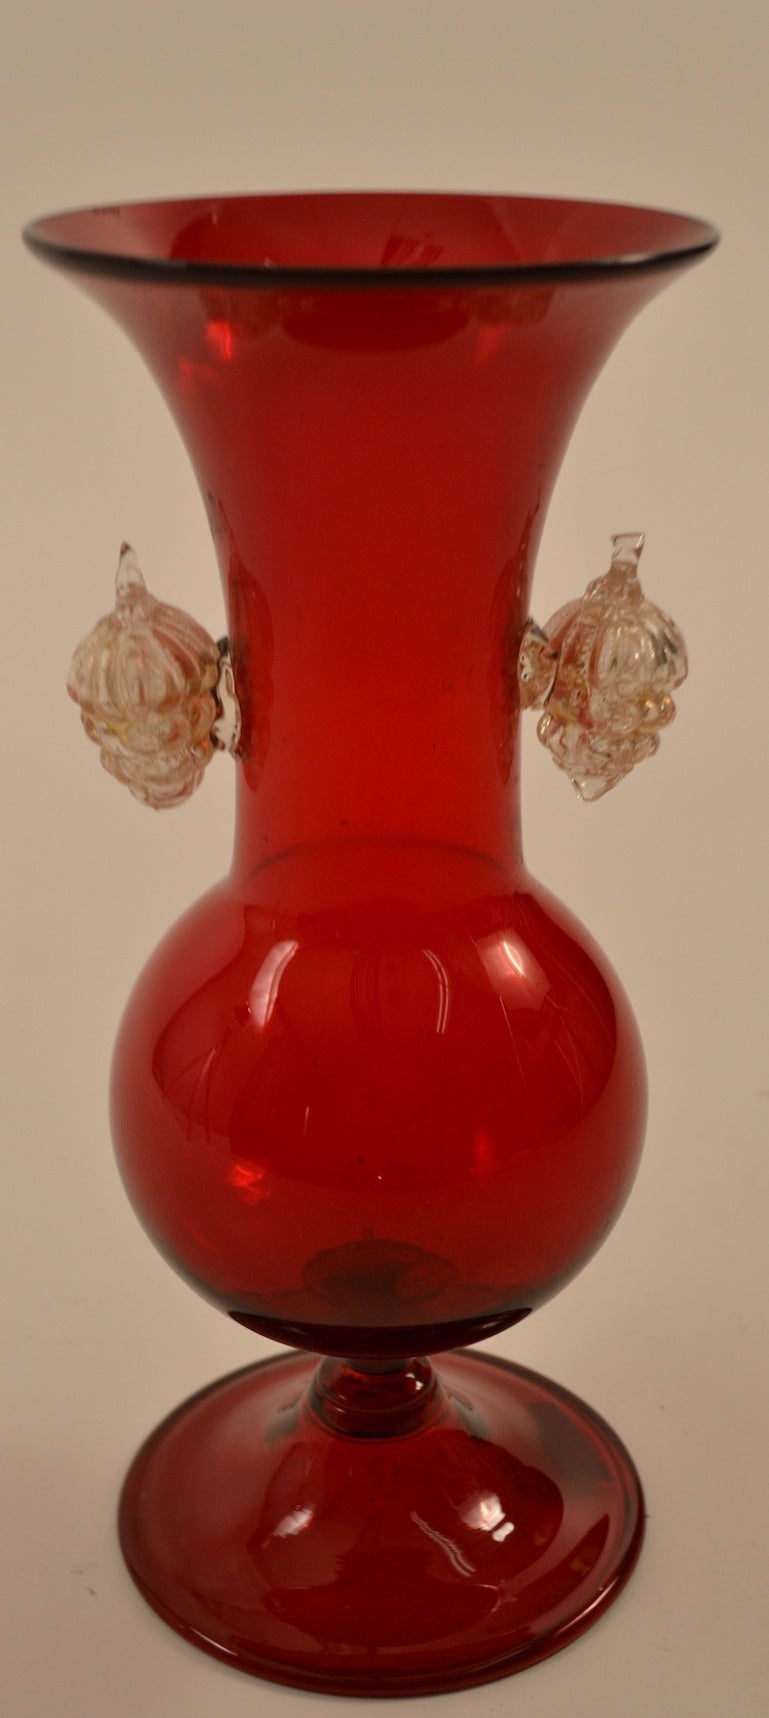 Early Barovier vase in red glass, with gold fleck inclusion grape clusters decorations  applied.  This interesting classic Murano vase still retains the original paper label, as shown.